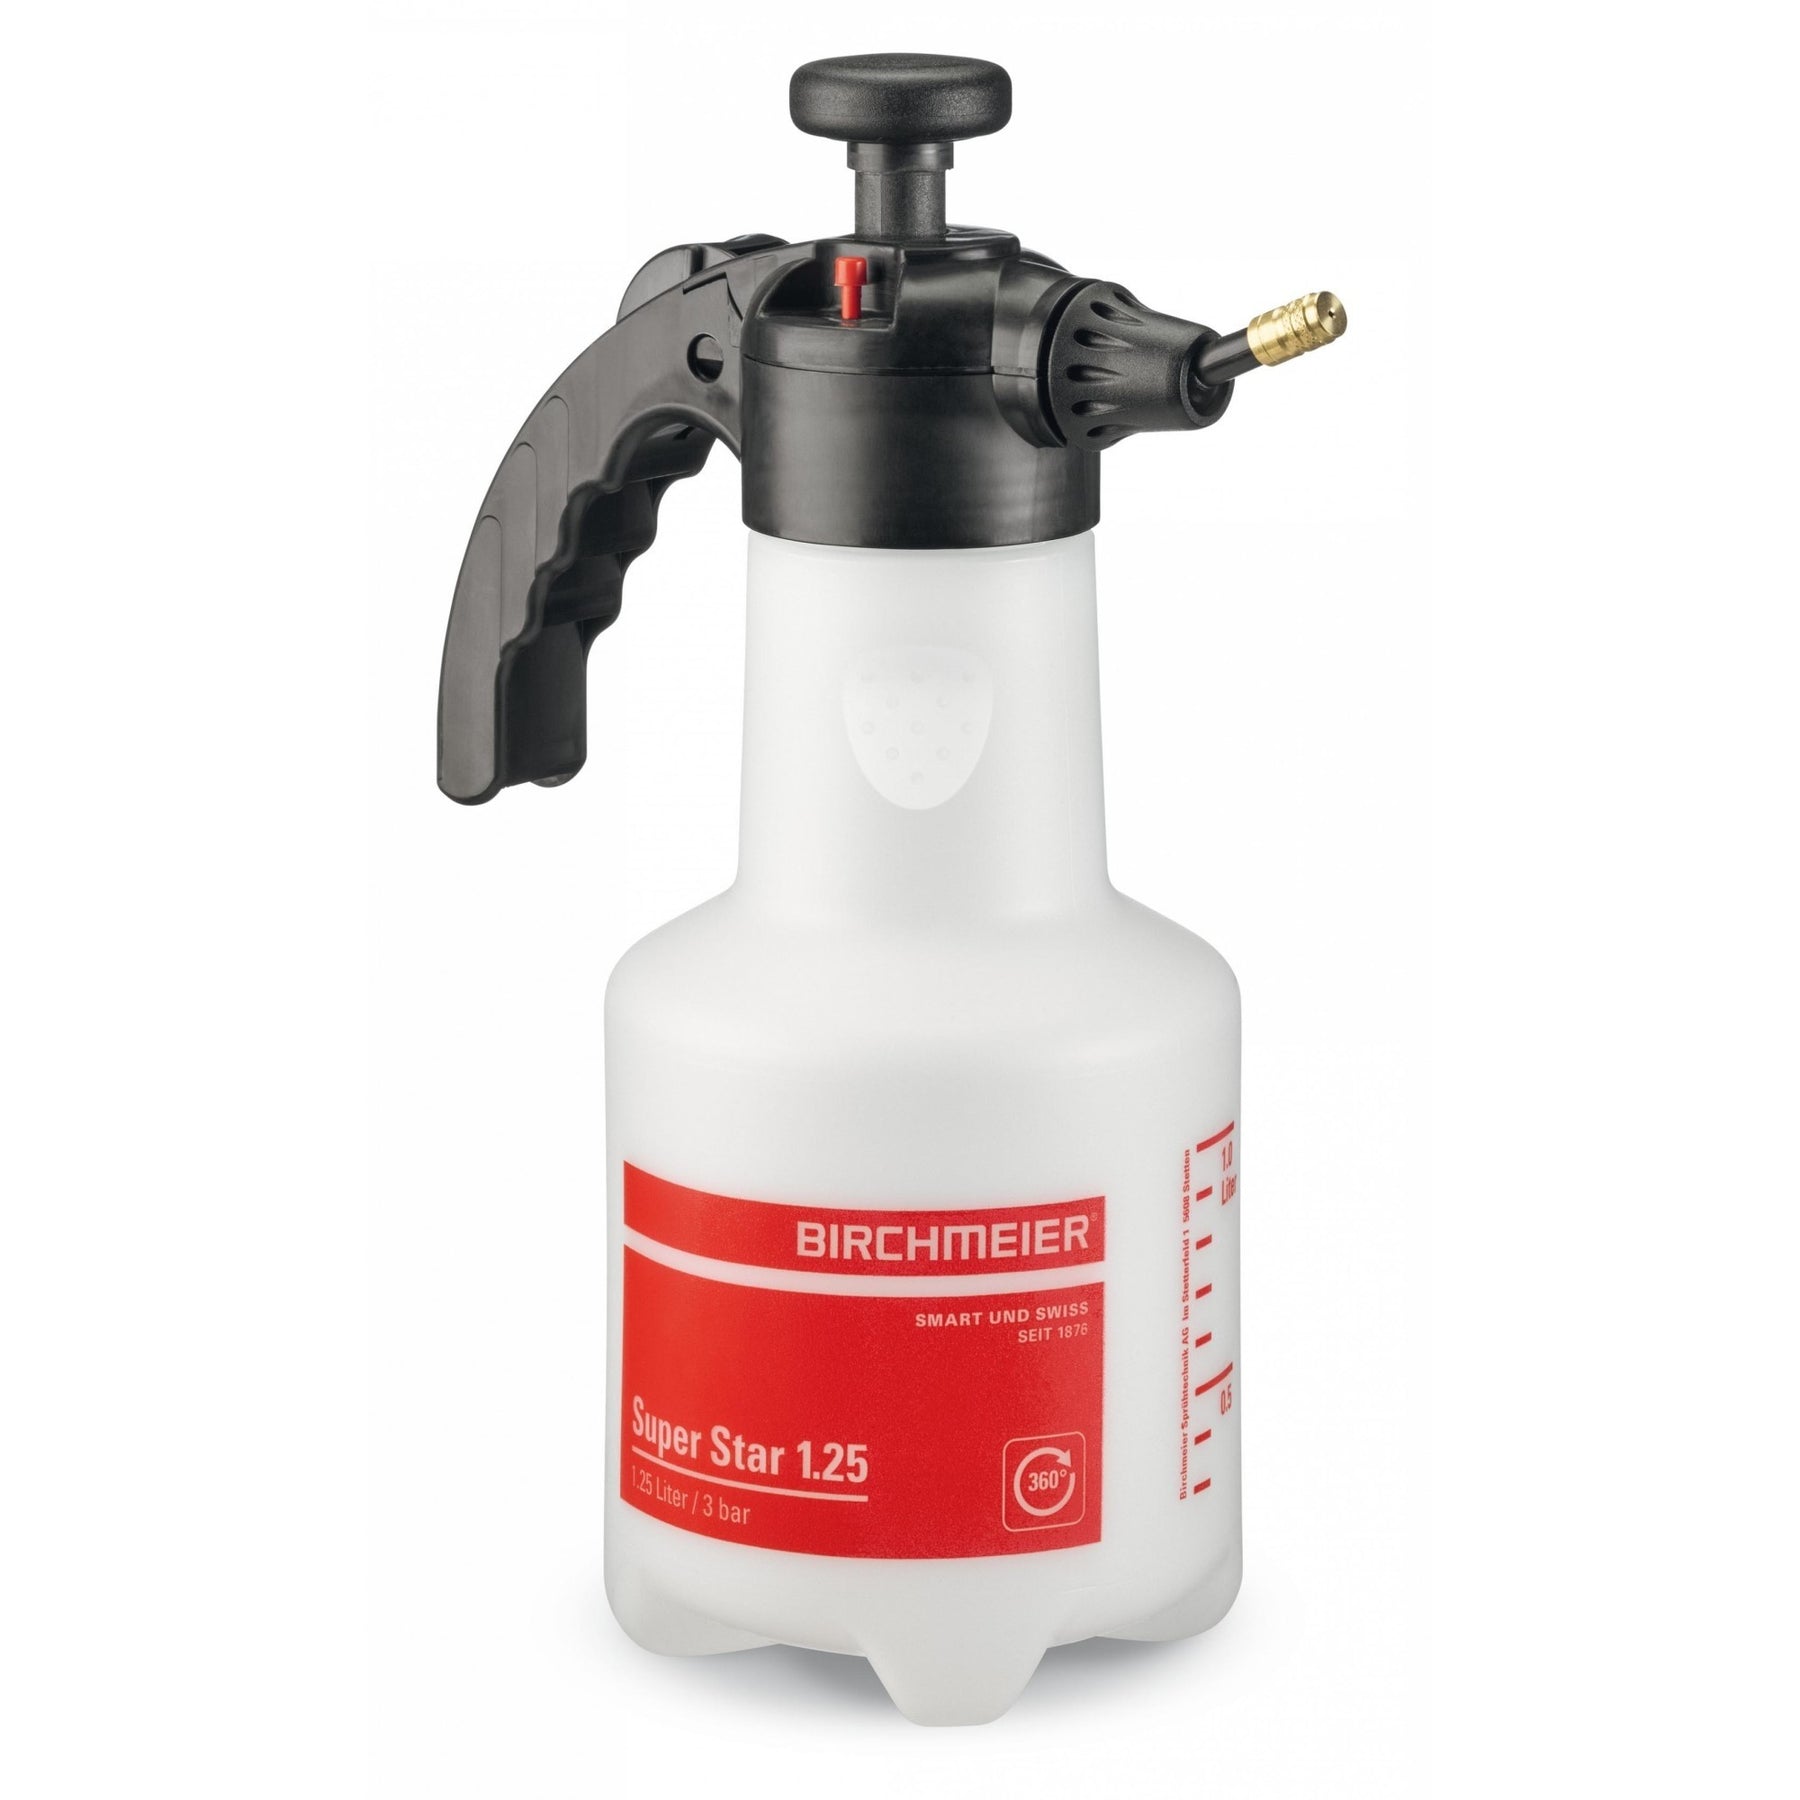 Photo of the full Birchmeier Super Star 125 product. It includes a handheld compression sprayer with a bottle holding capacity of 1.25 litres.